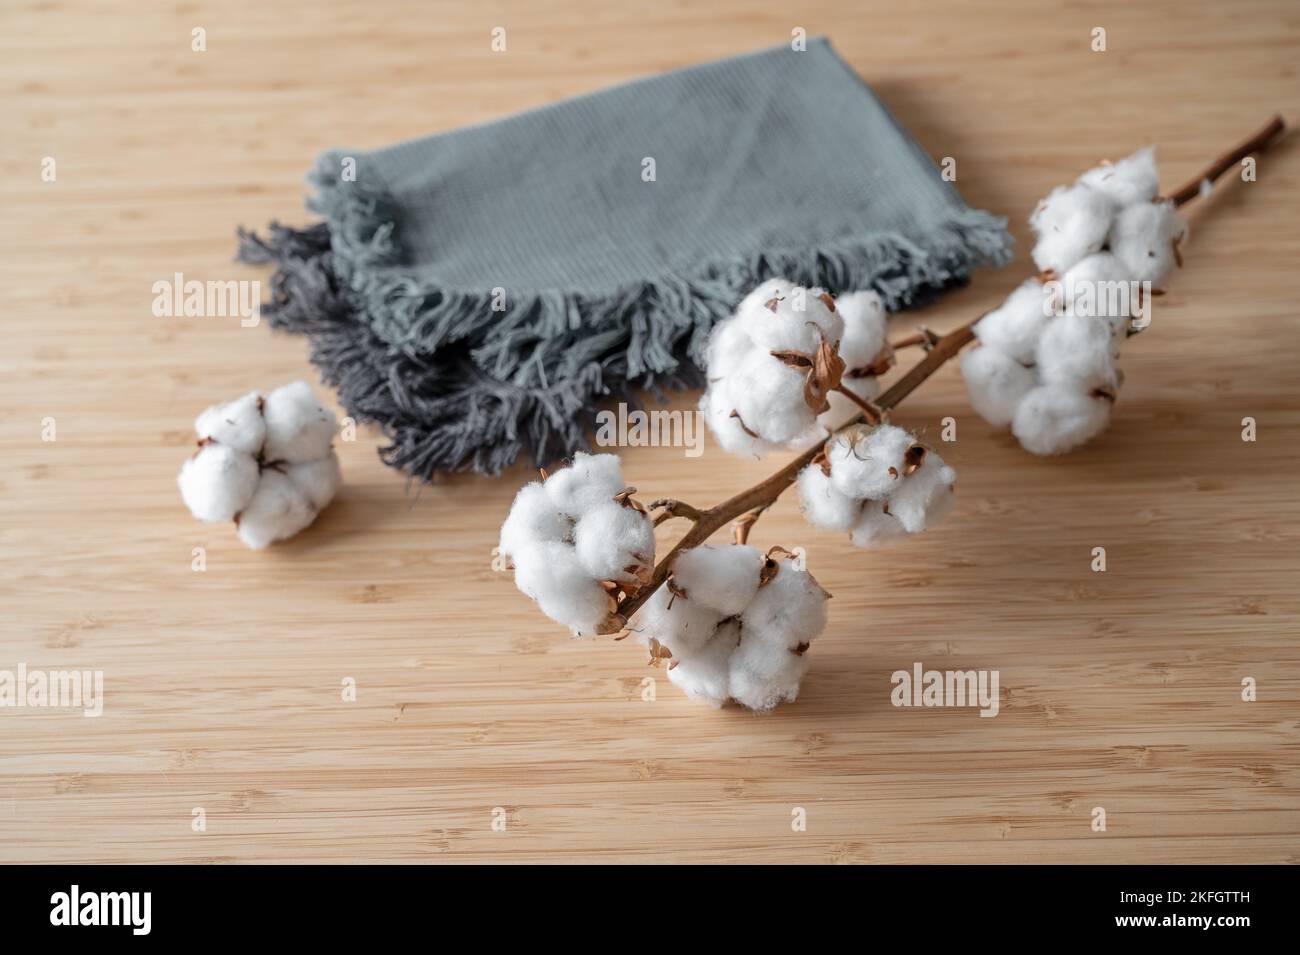 Fabrics made from sustainably and fairly grown cotton, two cloths and a twig on a wooden table, copy space, selected focus, narrow depth of field Stock Photo